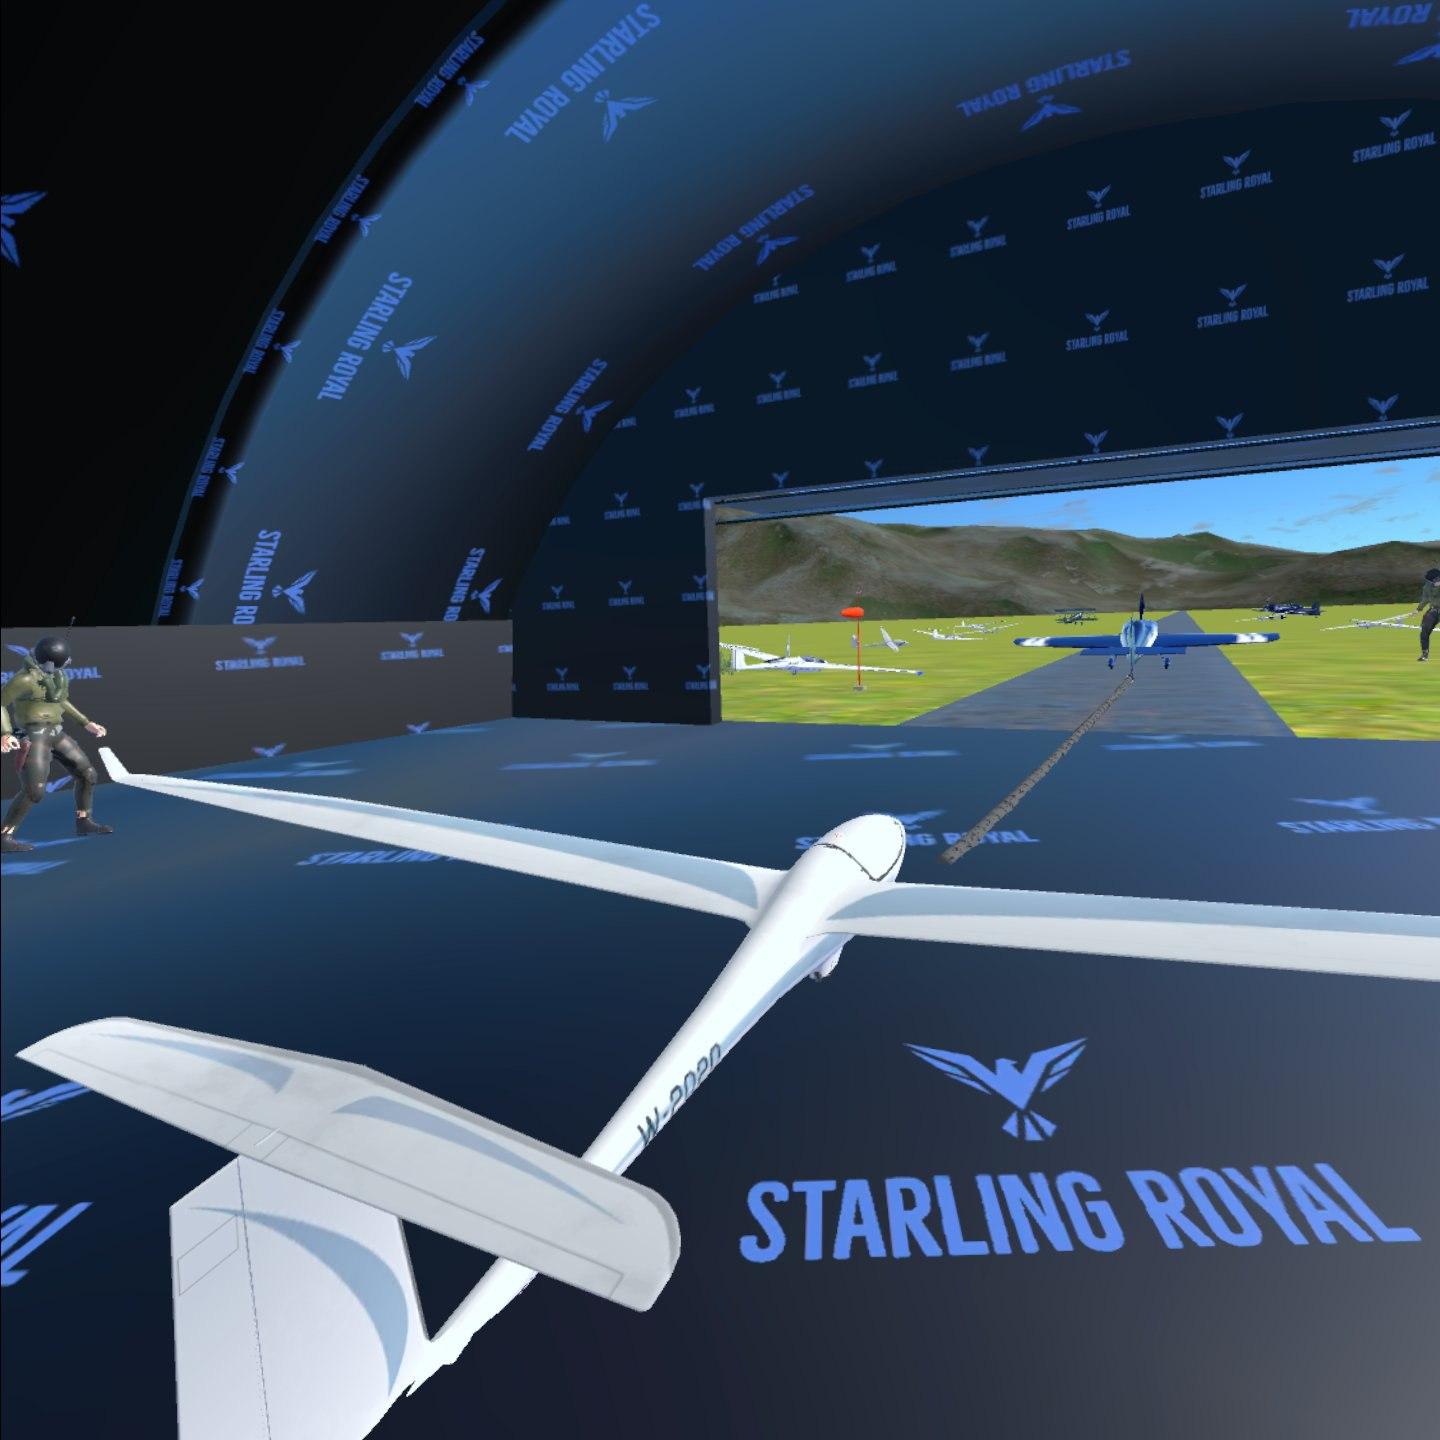 ‘Starling Royal Flight Simulator 2024’ Announced to be launched on Oculus Quest 2 Device